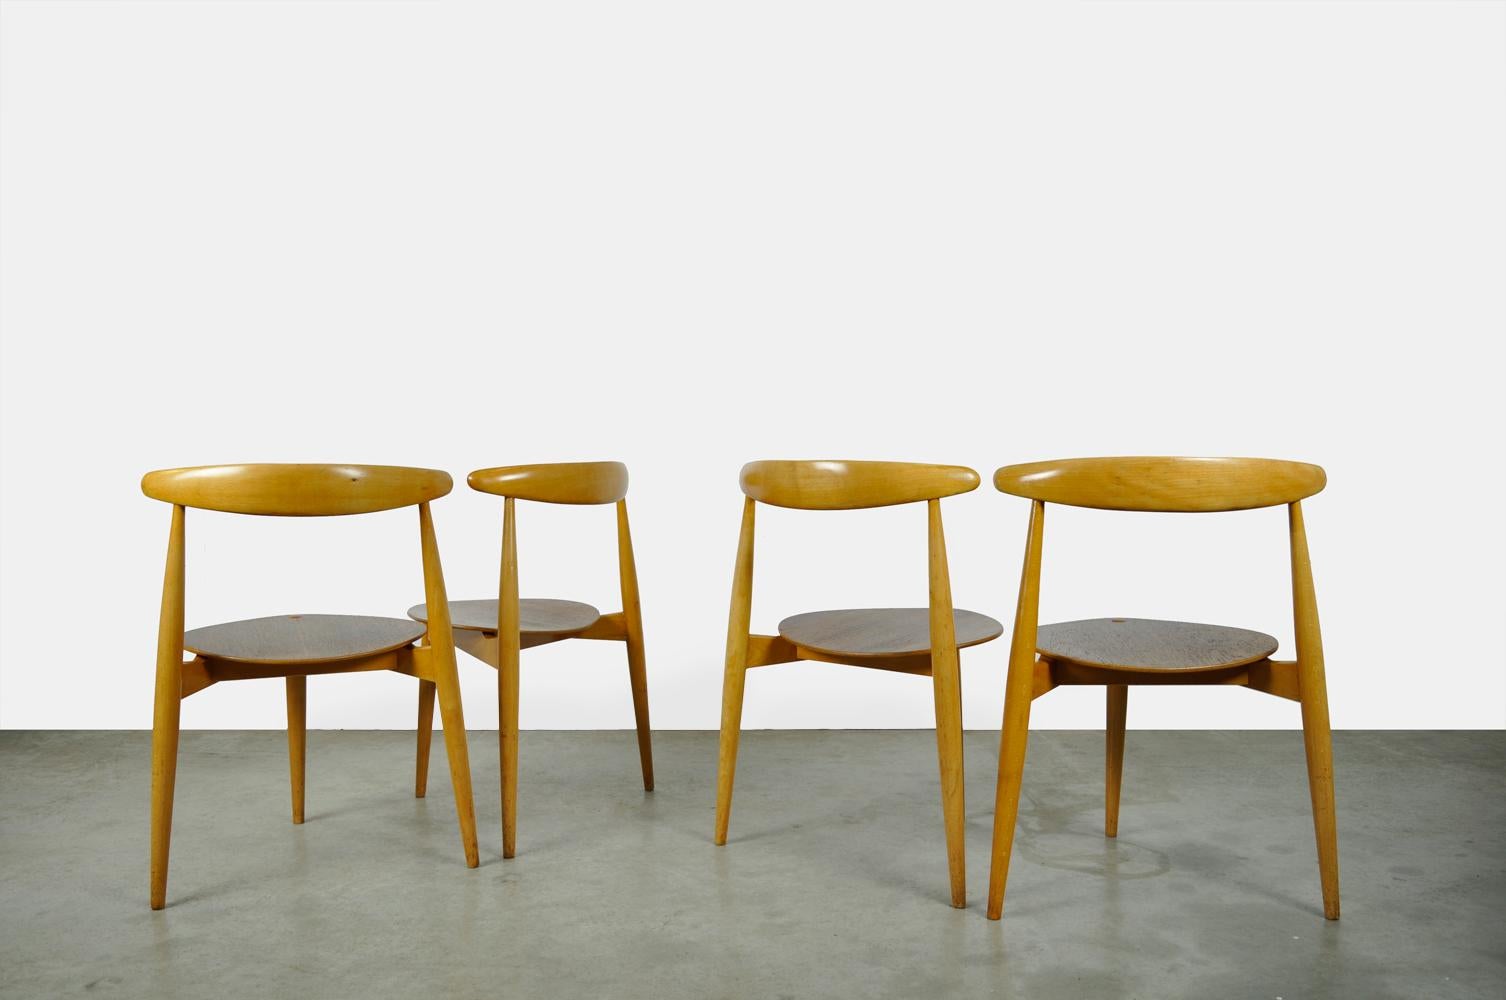 Beautiful set of 4 dining table chairs, designed by Hans J. Wegner and produced by Fritz Hansen, Denmark 1950s. The triangular construction of the special chairs is a combination of beech and teak wood. The frame is made of birch and the plywood